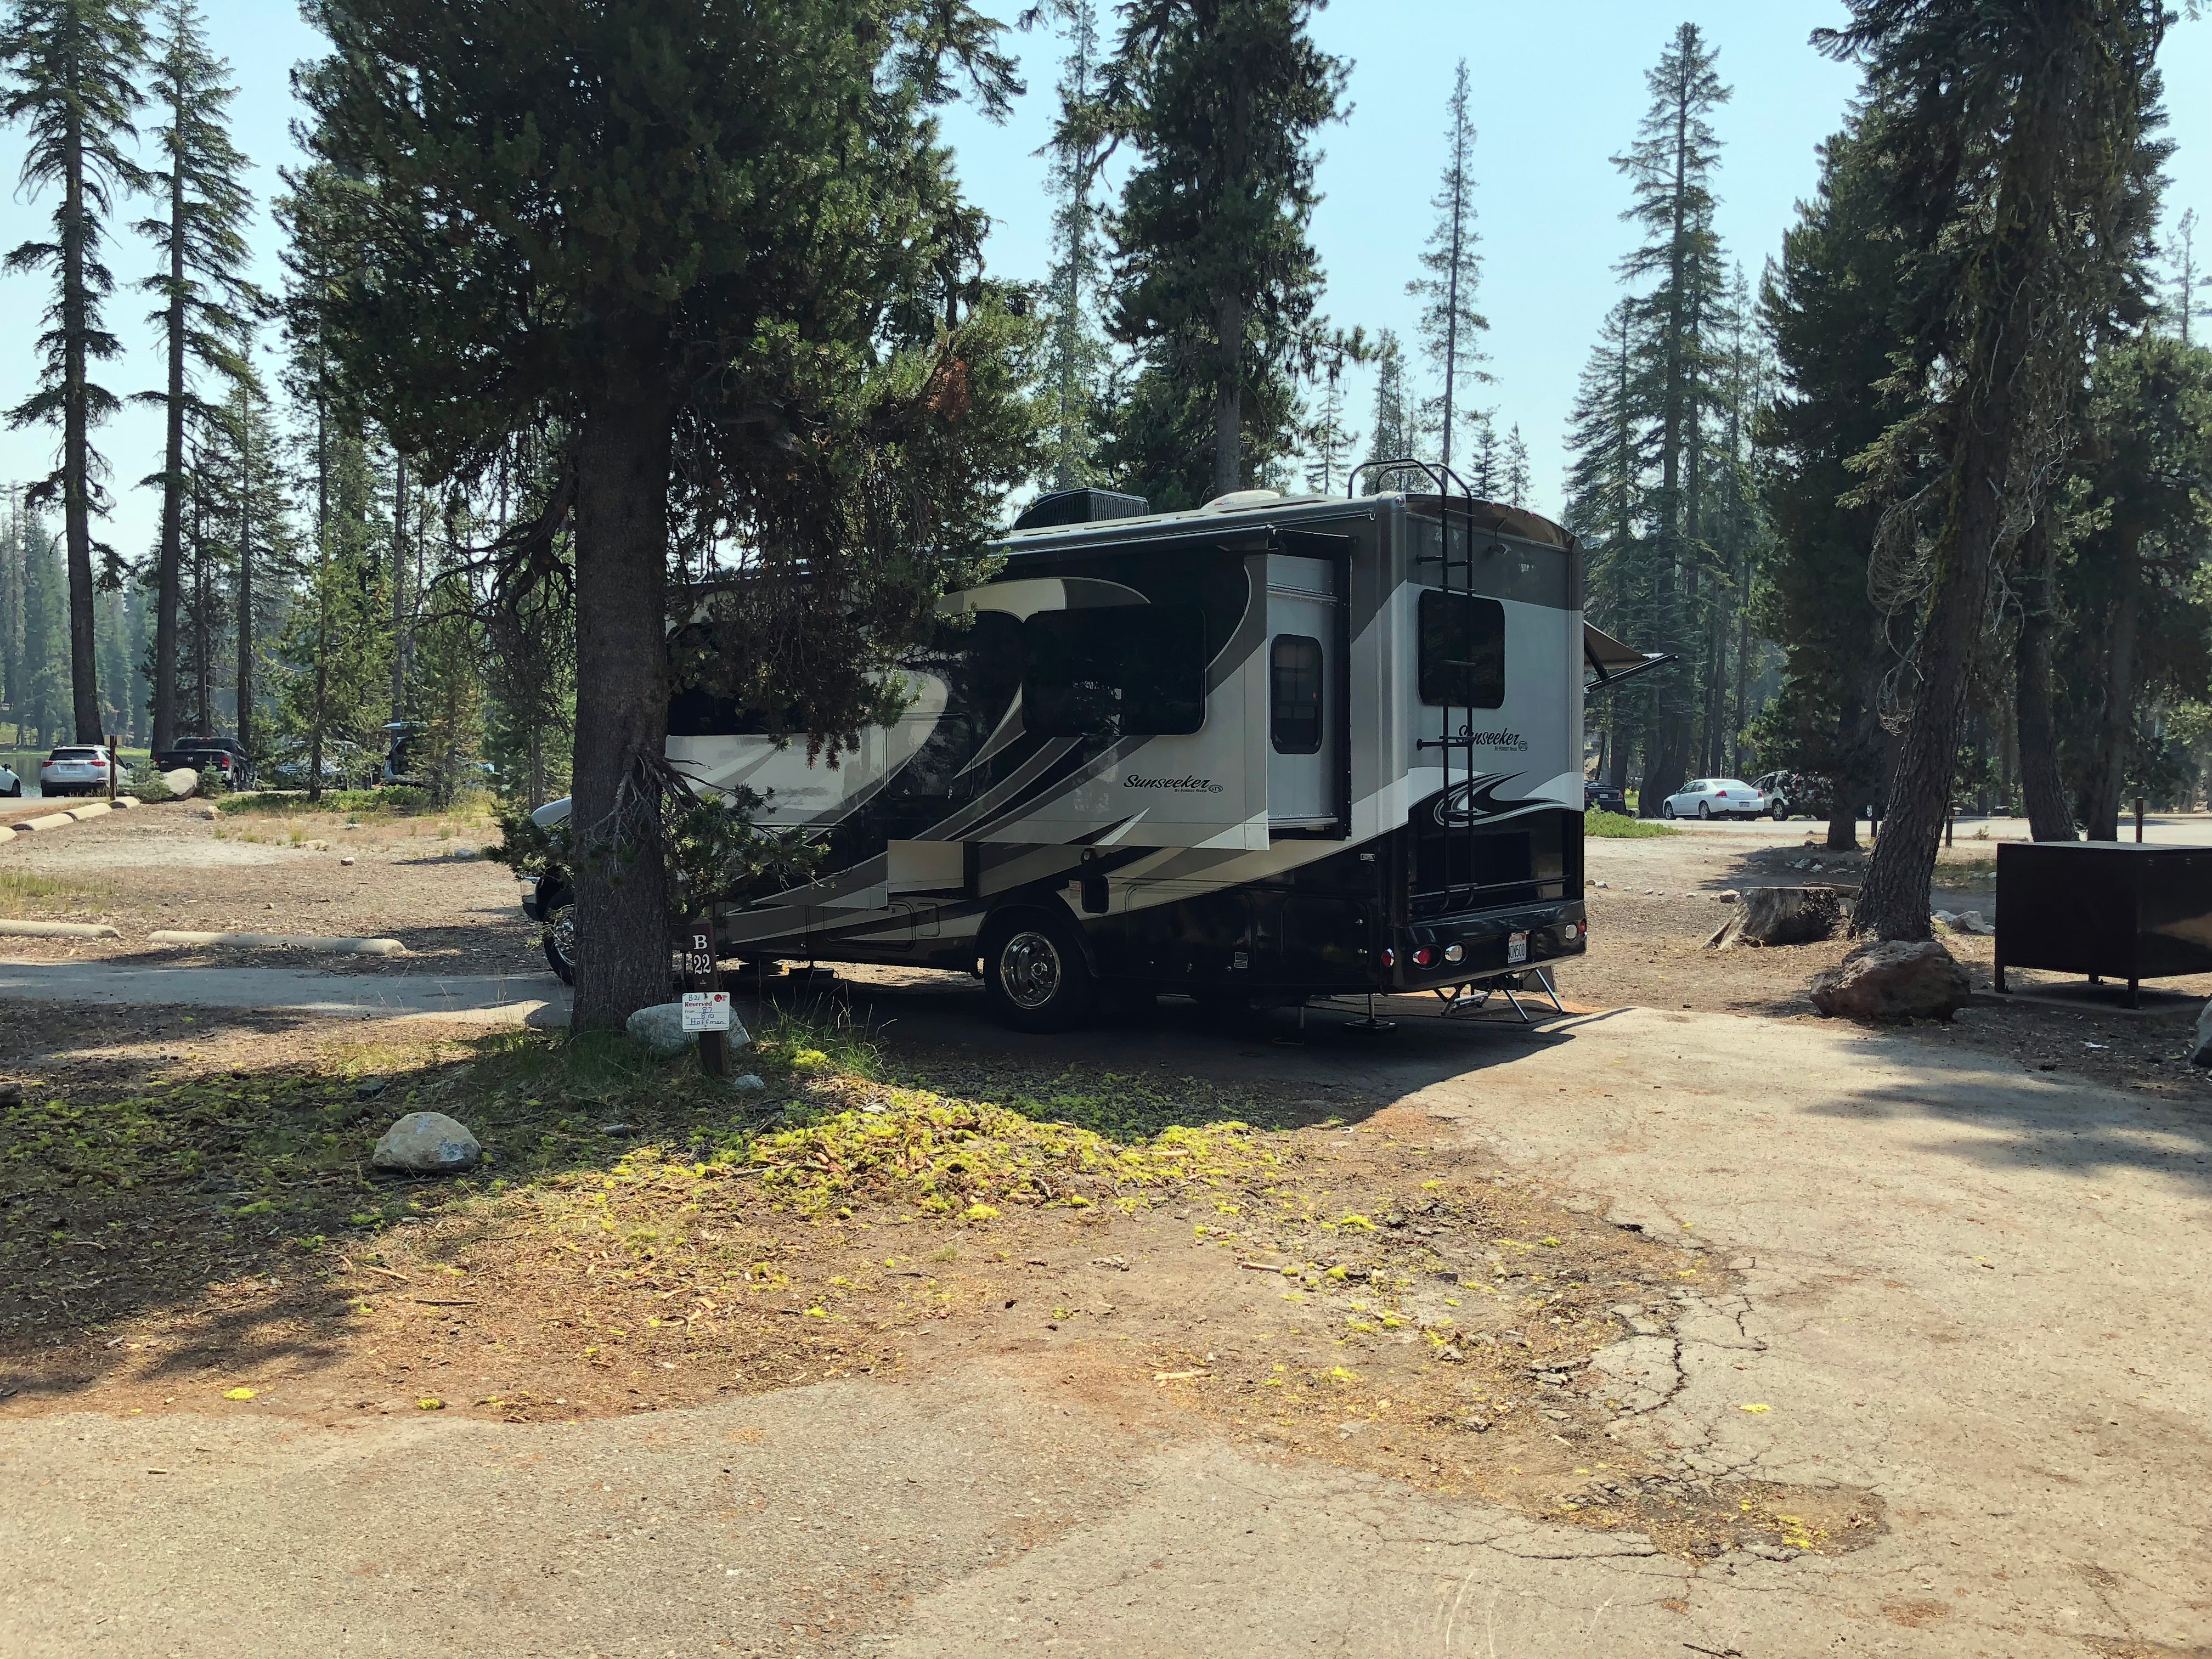 Camper submitted image from Summit Lake North — Lassen Volcanic National Park - 5